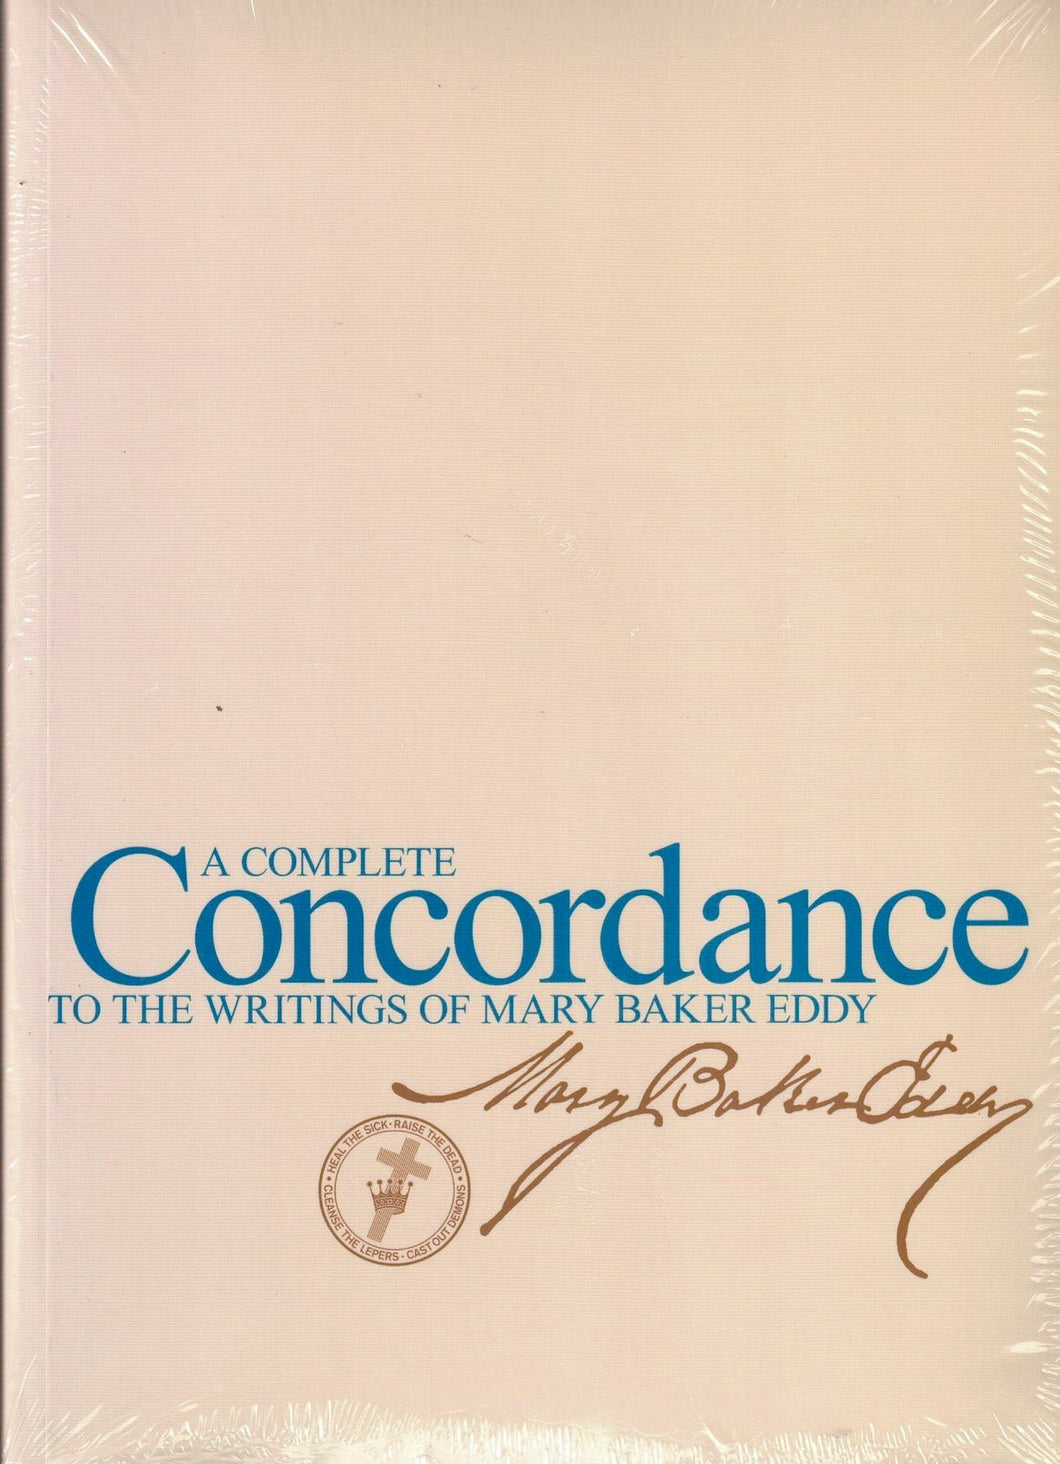 A Complete Concordance to the Writings of Mary Baker Eddy